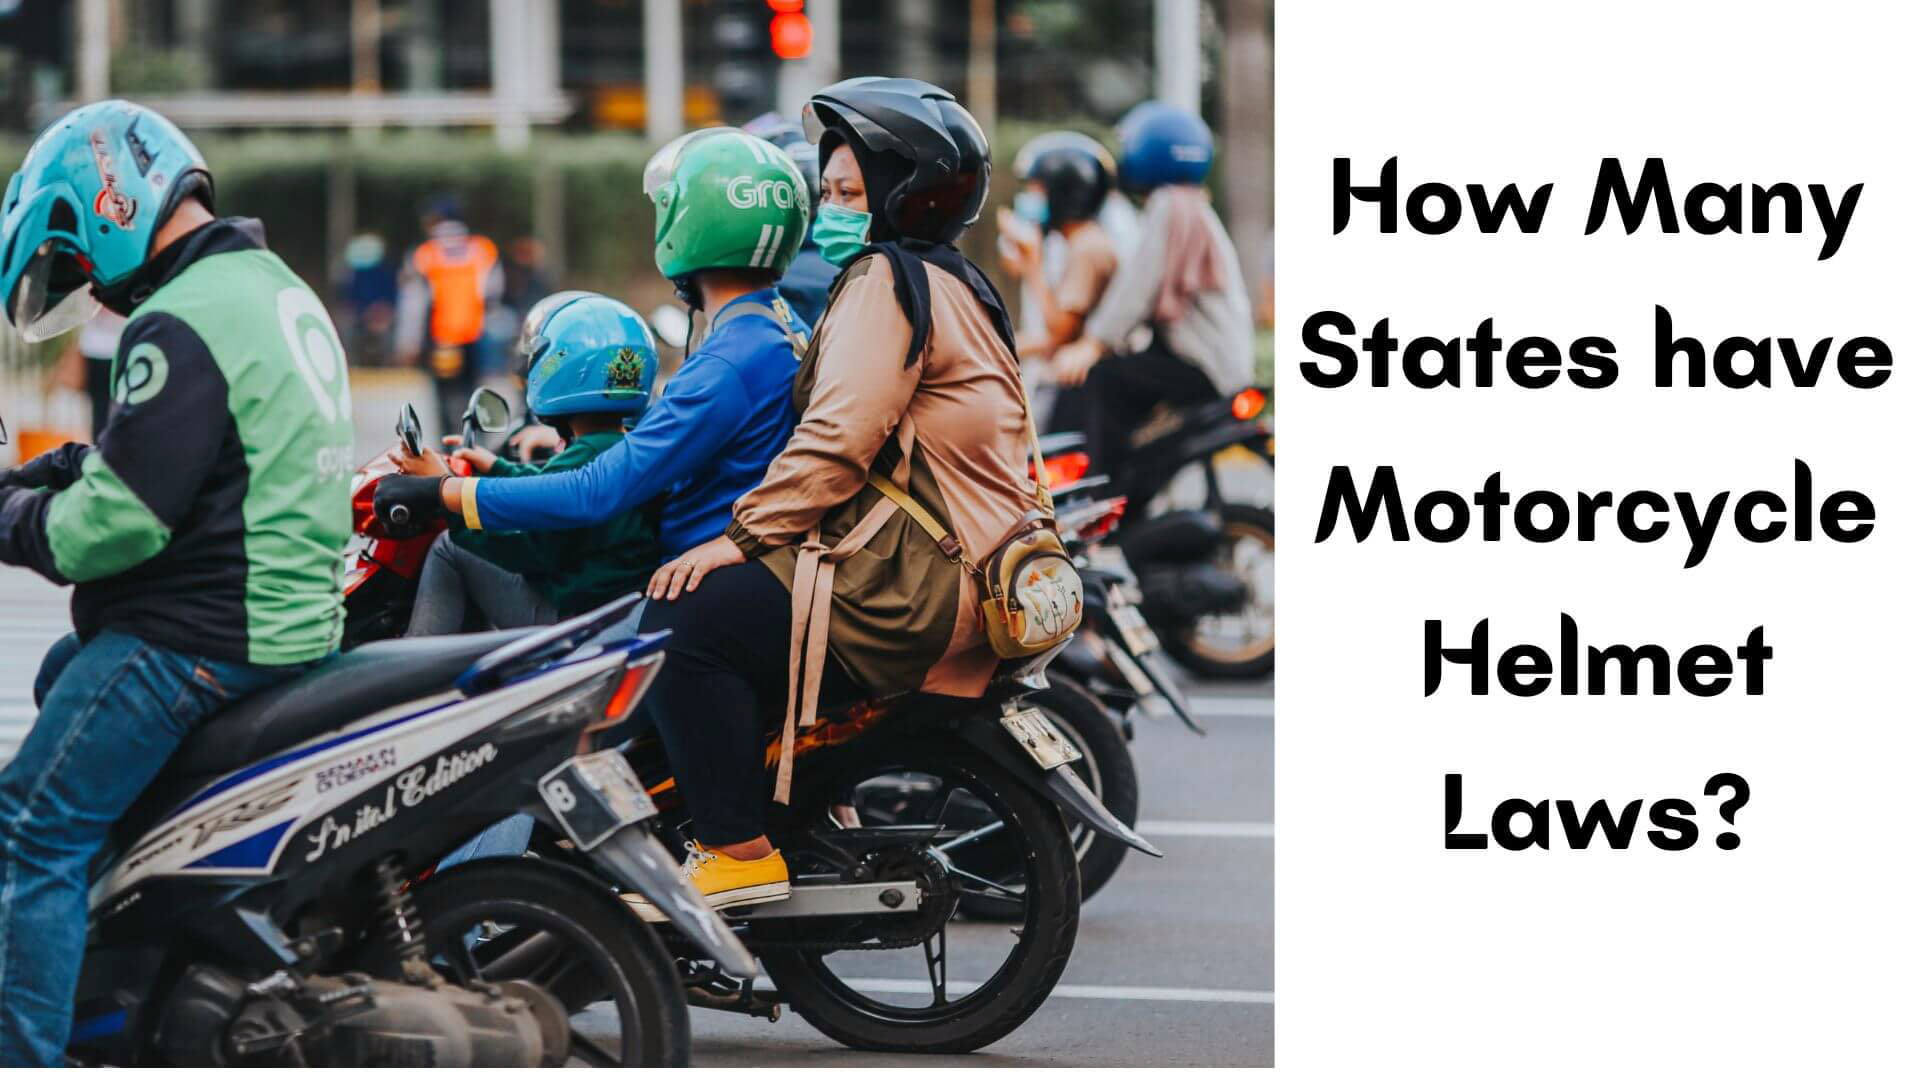 How Many States Have Motorcycle Helmet Laws?